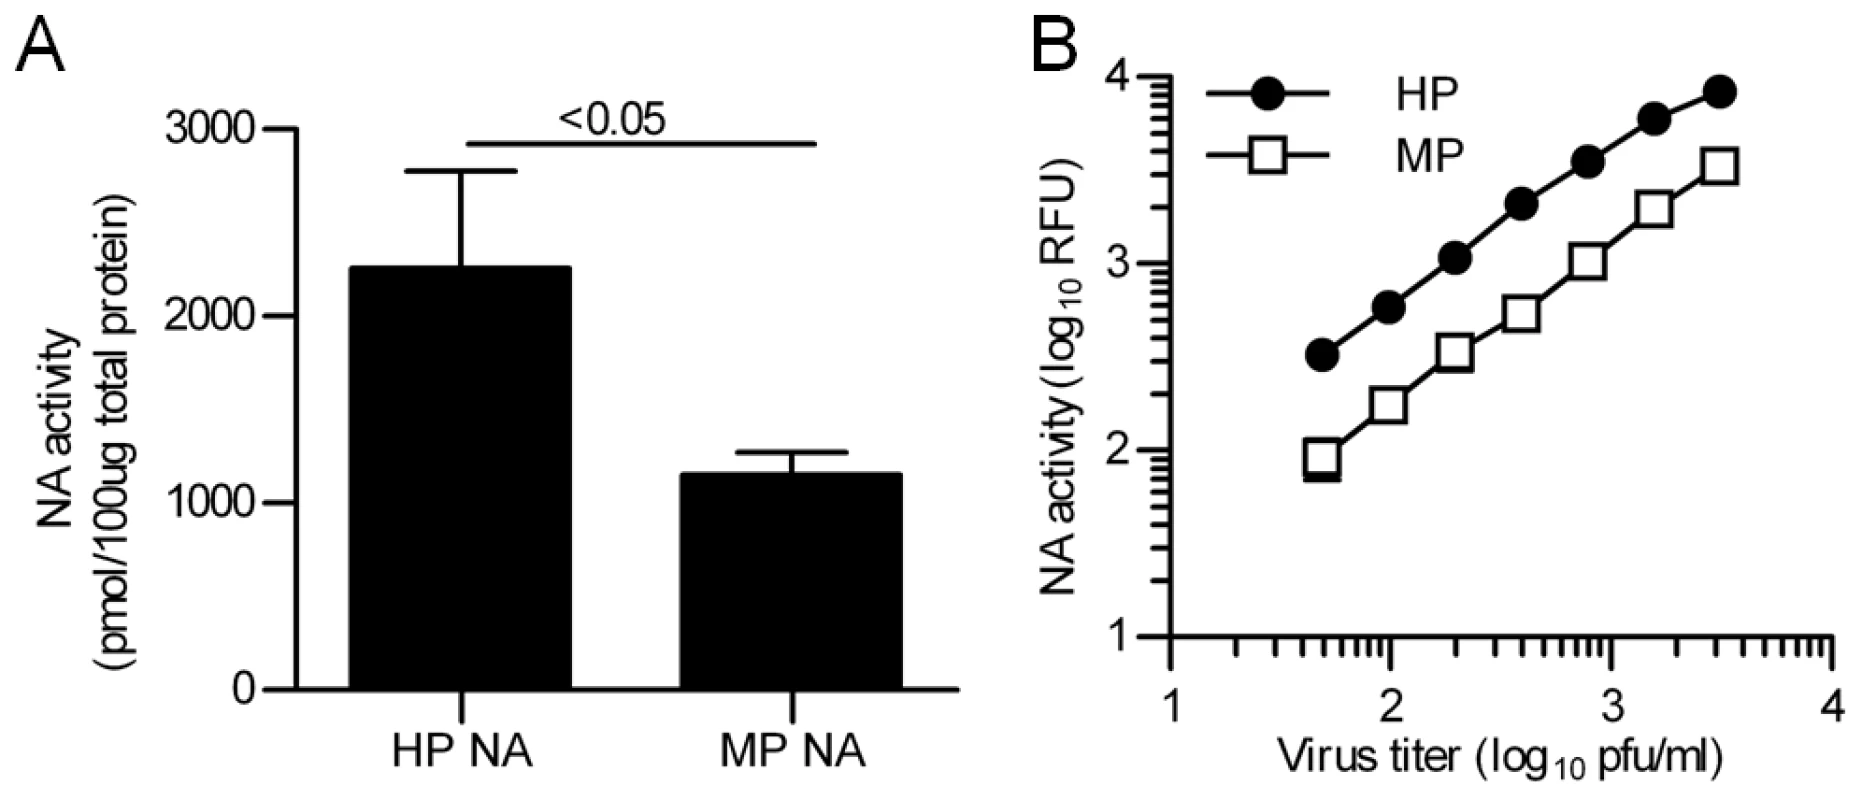 Enzymatic activities of the NA proteins from MP and HP influenza viruses.